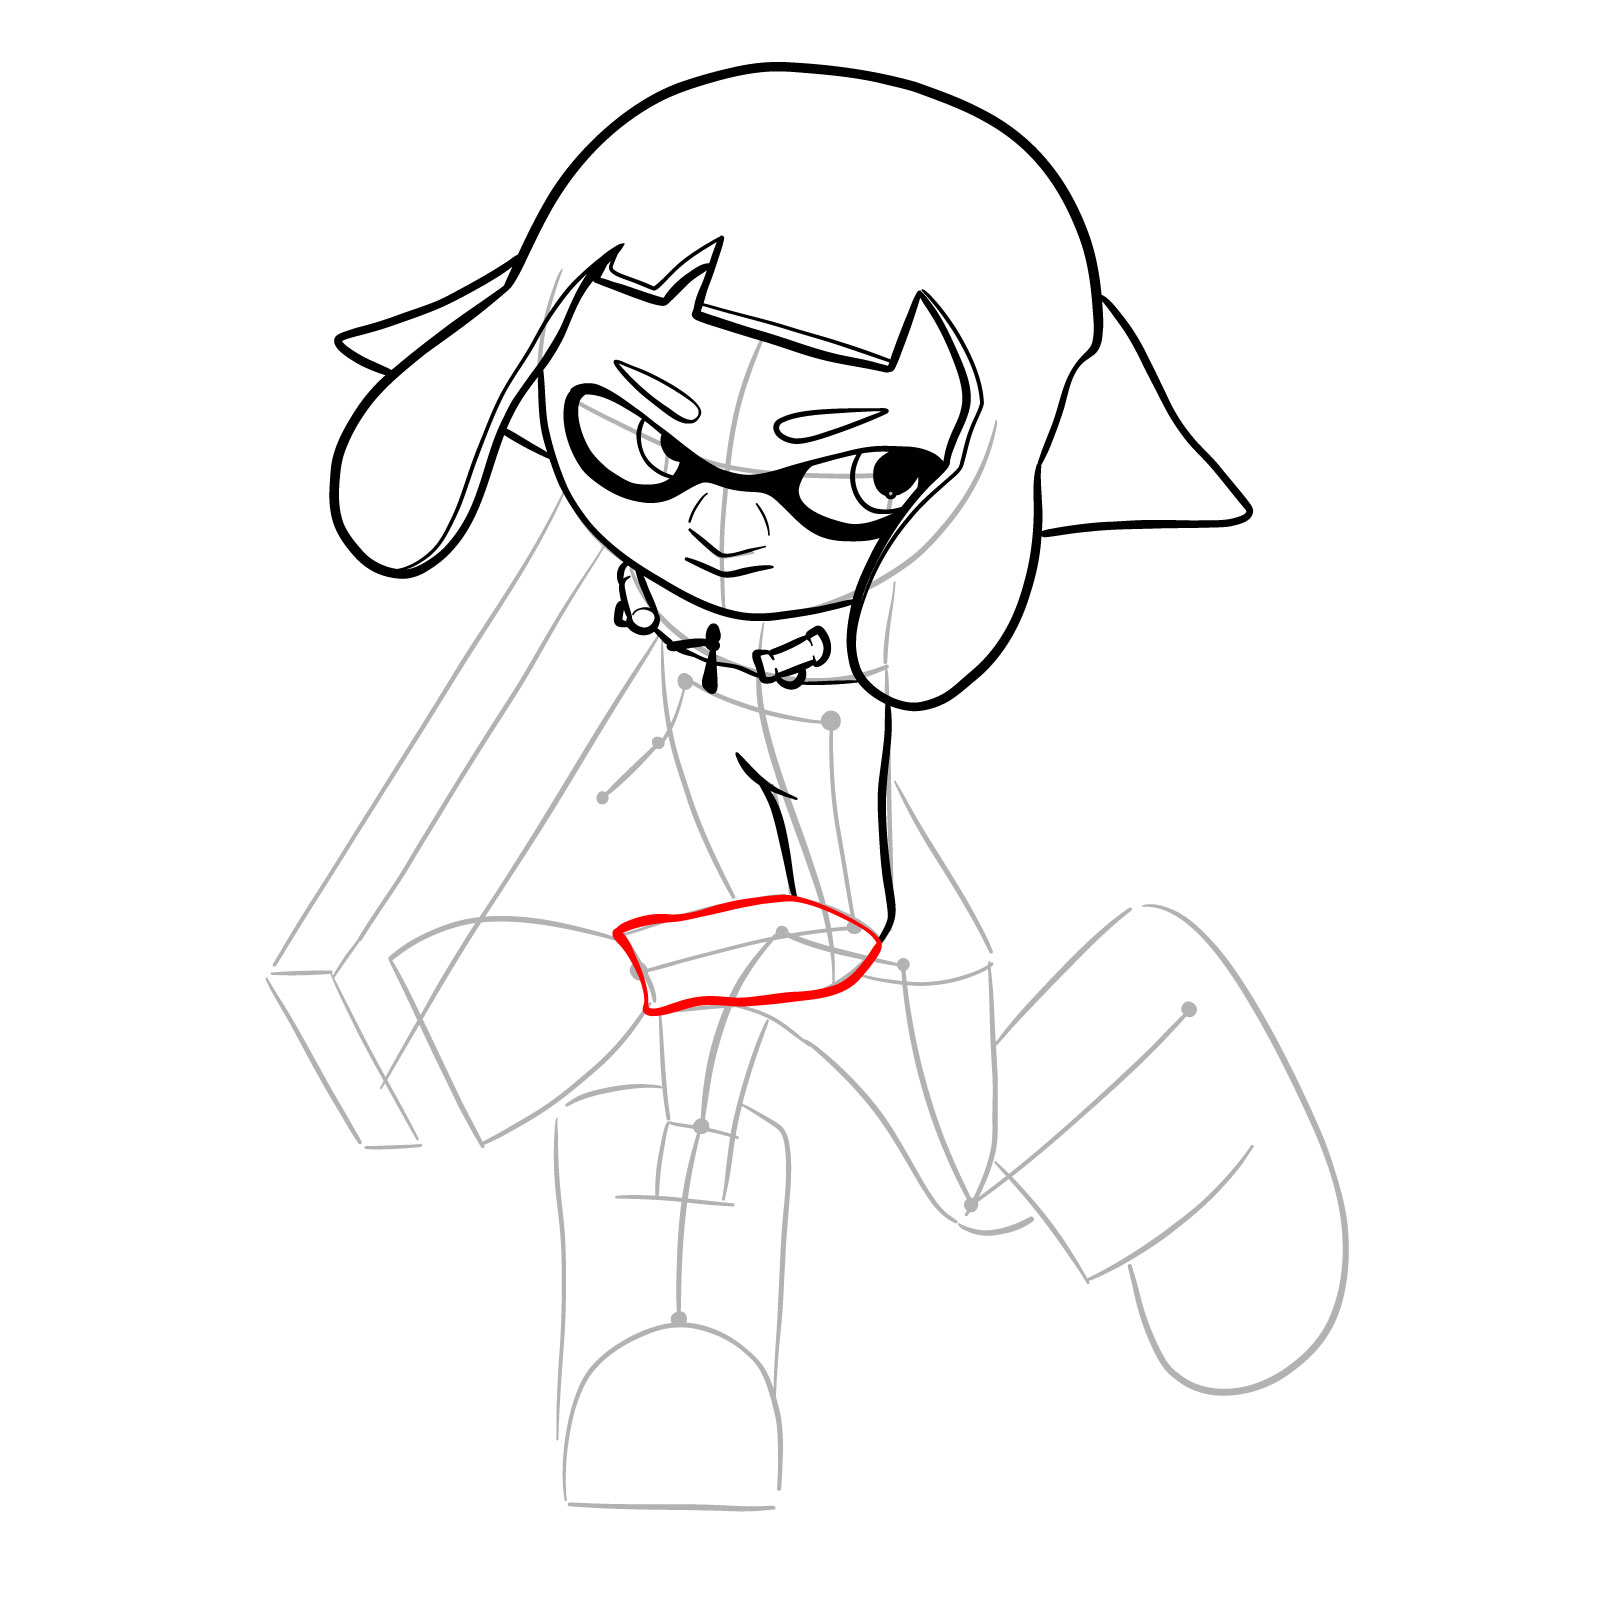 How to draw a Splatoon Agent 4 - step 14